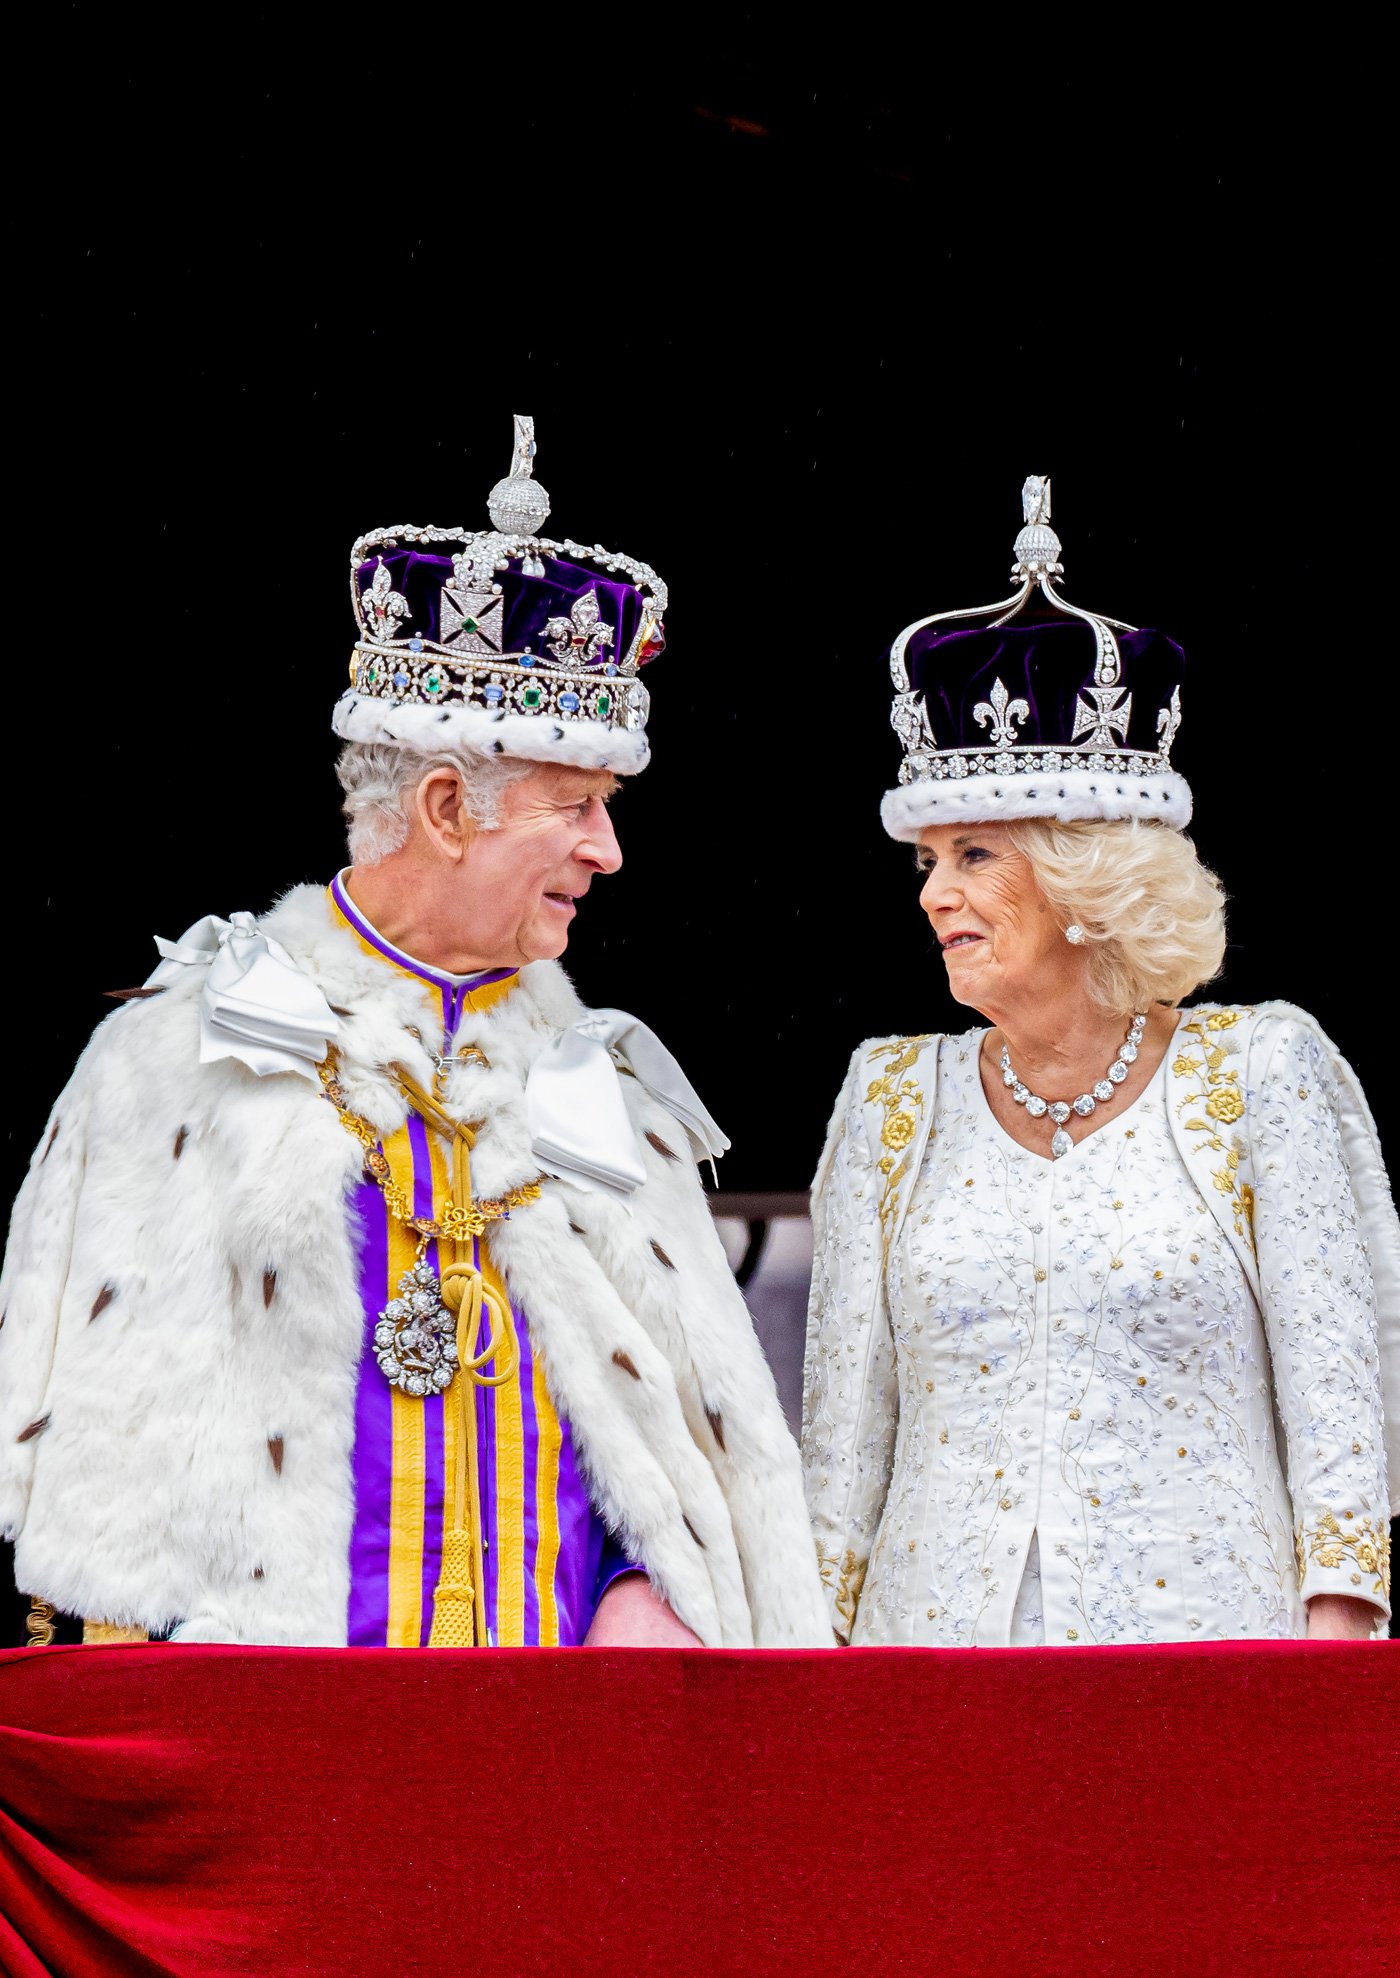 King Charles and Queen Camilla at the balcony of Buckingham Palace 